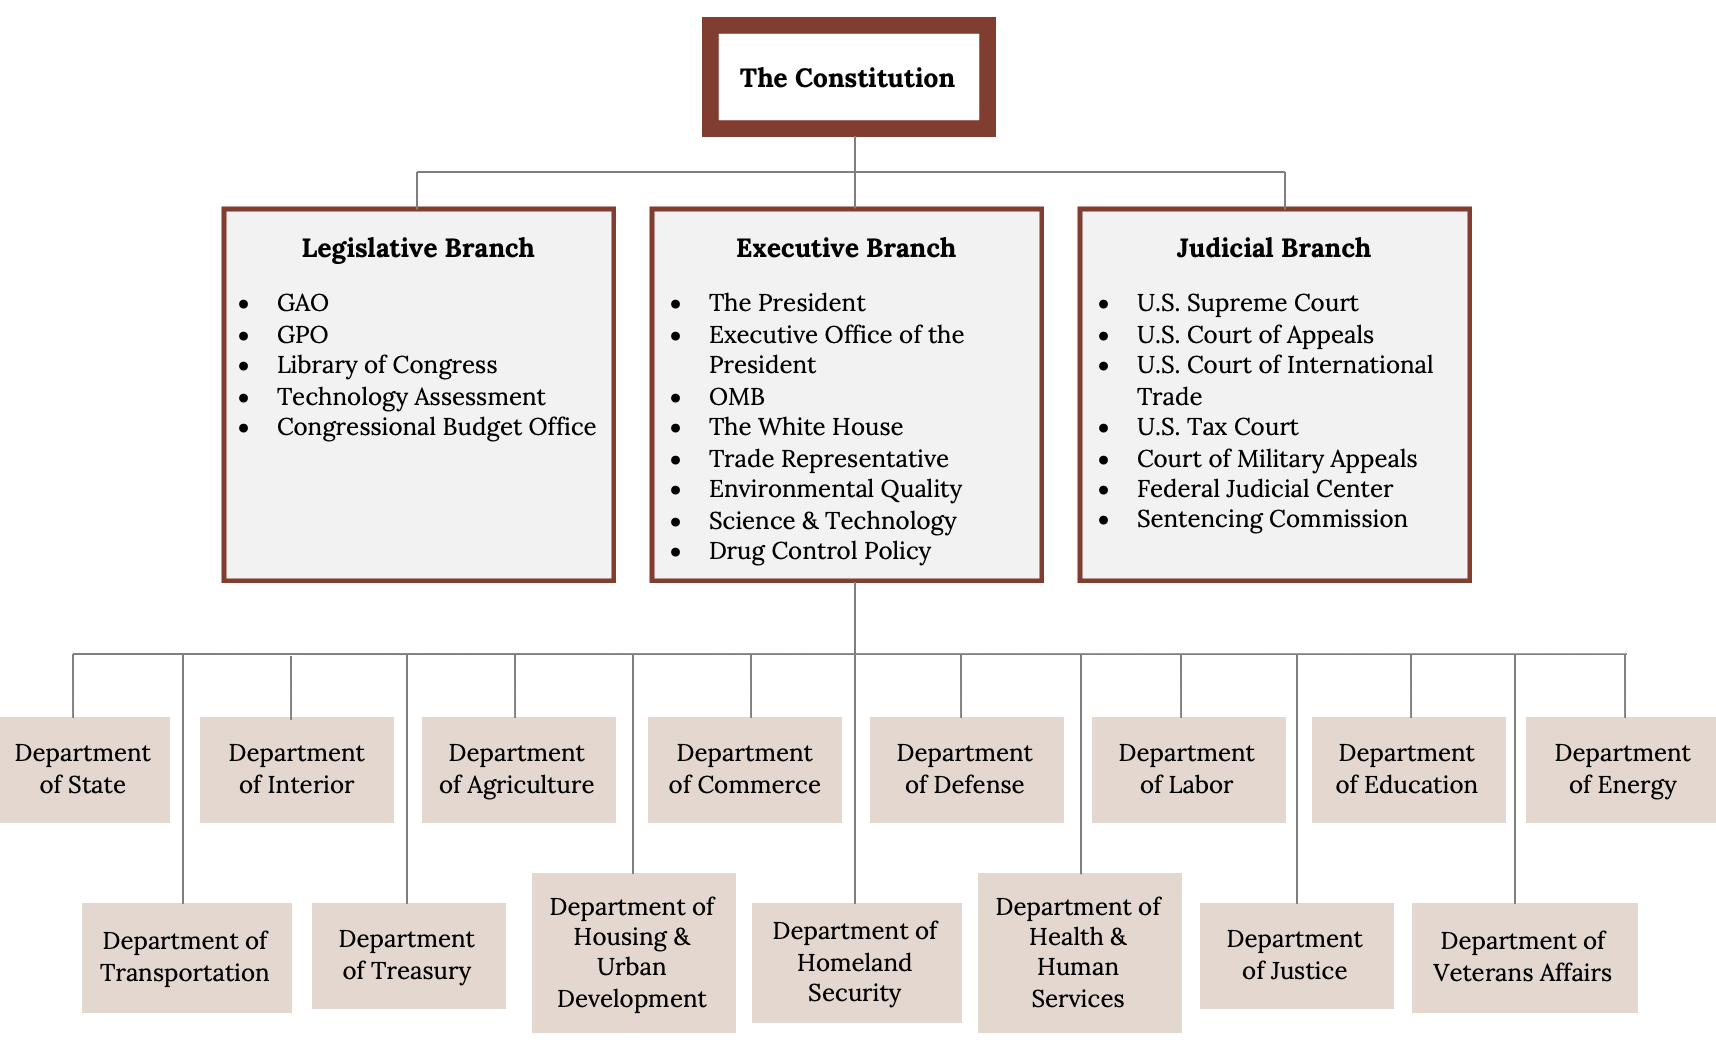 Organizational structure. 'The Constitution' is at the top. Beneath it: The Legislative Branch (GAO, GPO, Library of Congress, Technology Assessment, Congressional Budget Office), Judicial Branch (U.S. Supreme Court, U.S. Court of Appeals, U.S. Court of International Trade, U.S. Tax court, Court of Military Appeals, Federal Judicial Center, Sentencing Commission), Executive Branch (The President, Executive Office of the President, OMB, The White House, Trade Repreentative, Environmental Quality, Science & Technology, Drug Control Policy). Underneath the Executive Branch is 15 Departments: State, Interior, Agriculture, Commerce, Defense, Labor, Education, Energy, Transportation, Treasury, Housing & Urban Development, Homeland Security, Health & Human Services, Justice, Veterans Affairs.